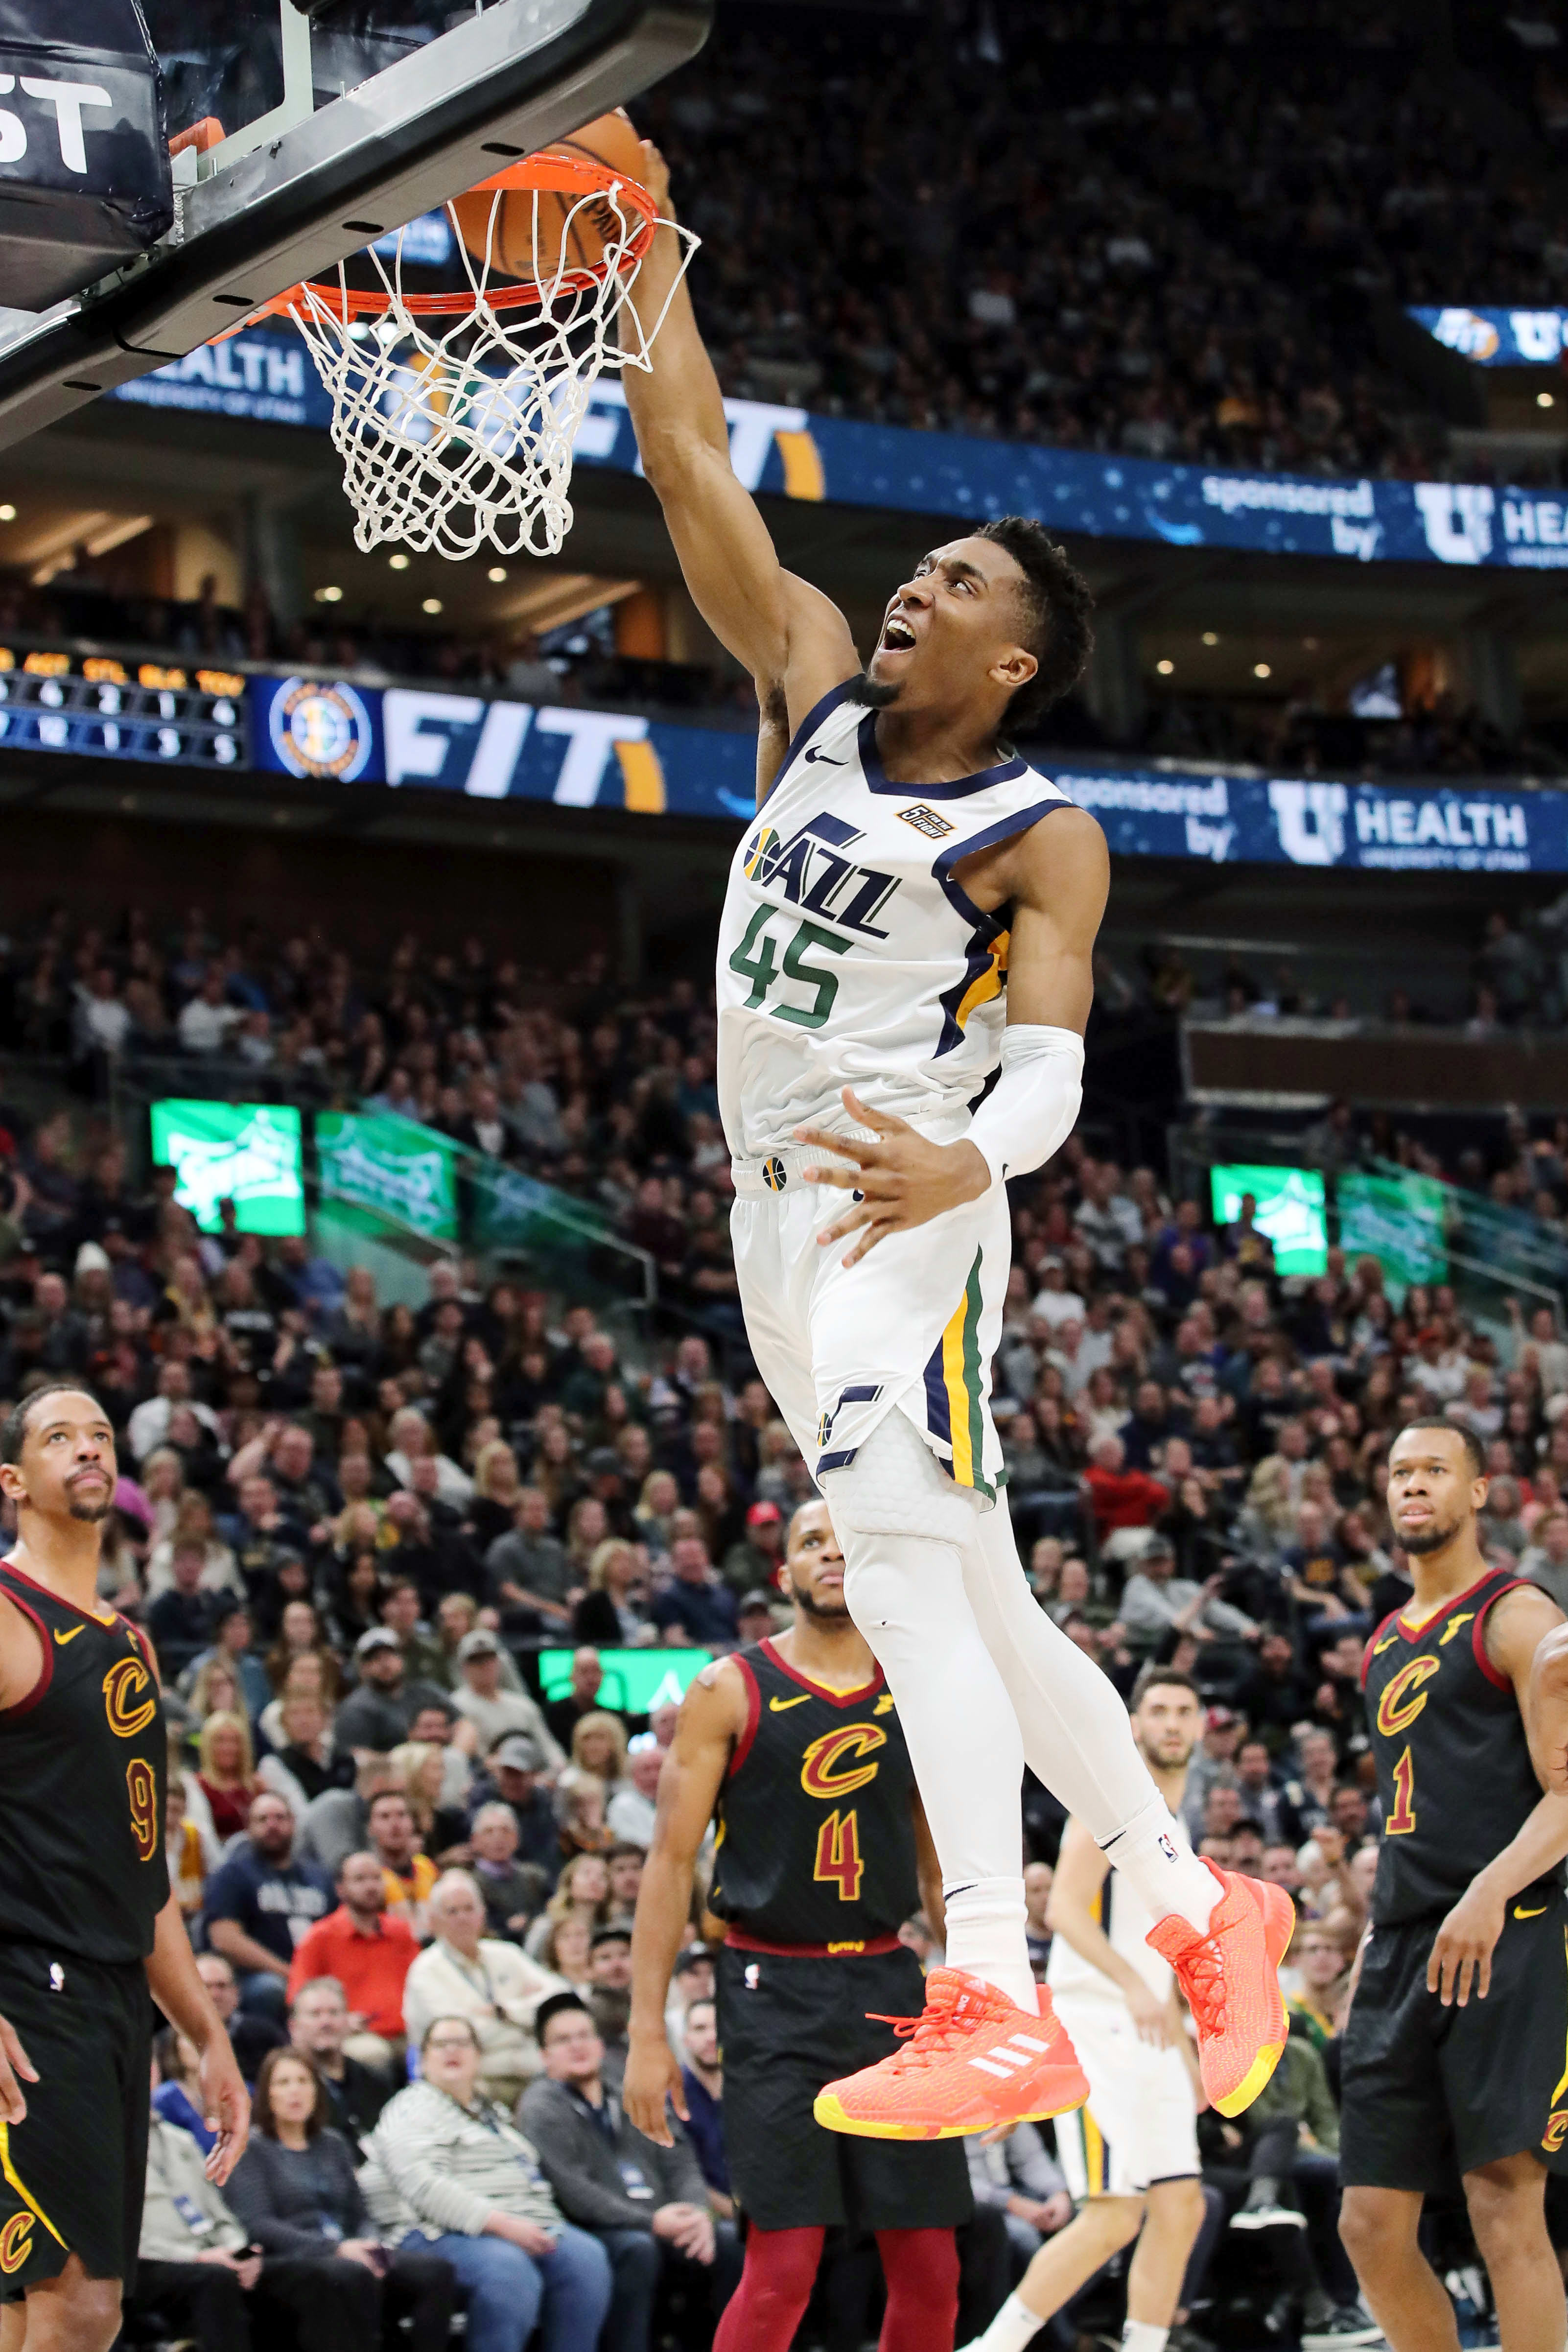 Donovan Mitchell Told Us He Cooked Up Some Crazy Dunks That We May